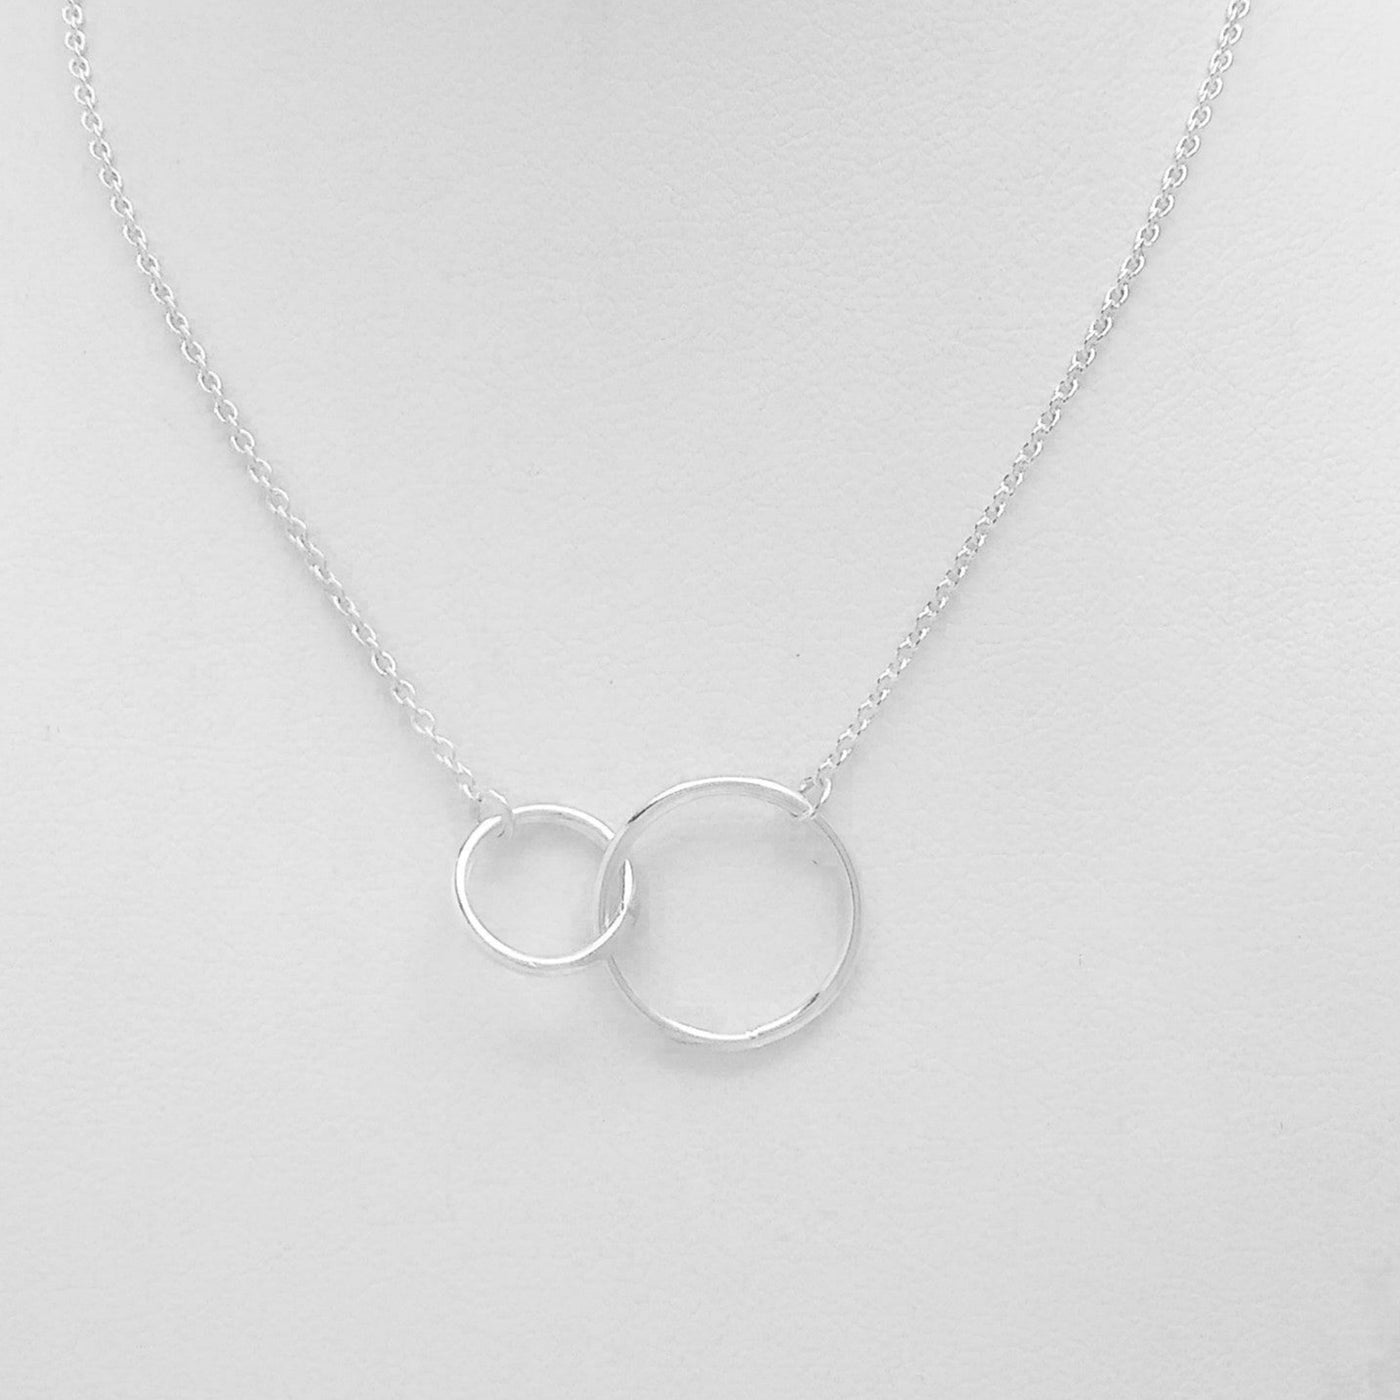 Sterling Silver Connected Circles Necklace - Silver Parrot, Inc. 